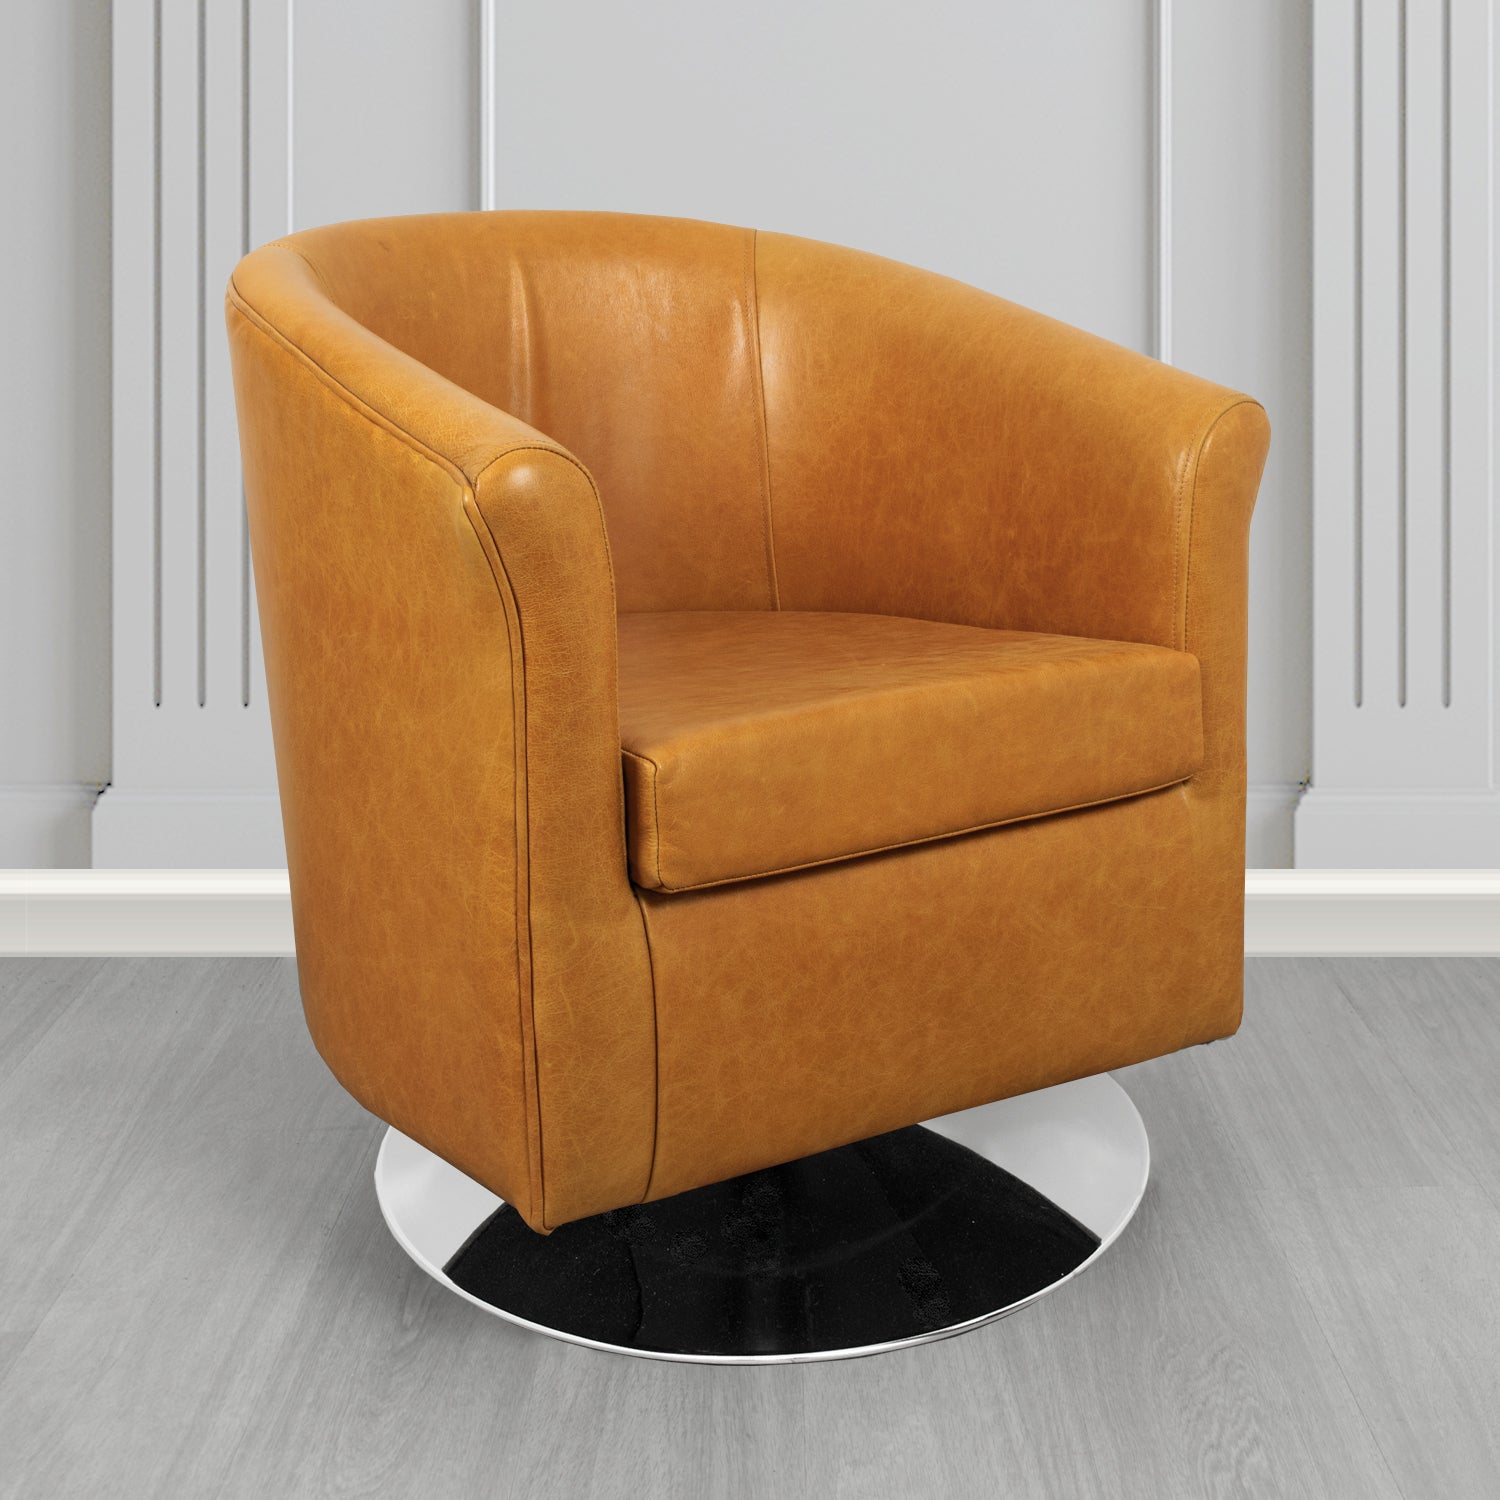 Tuscany Swivel Tub Chair in Crib 5 Old English Bruciato Genuine Leather - The Tub Chair Shop